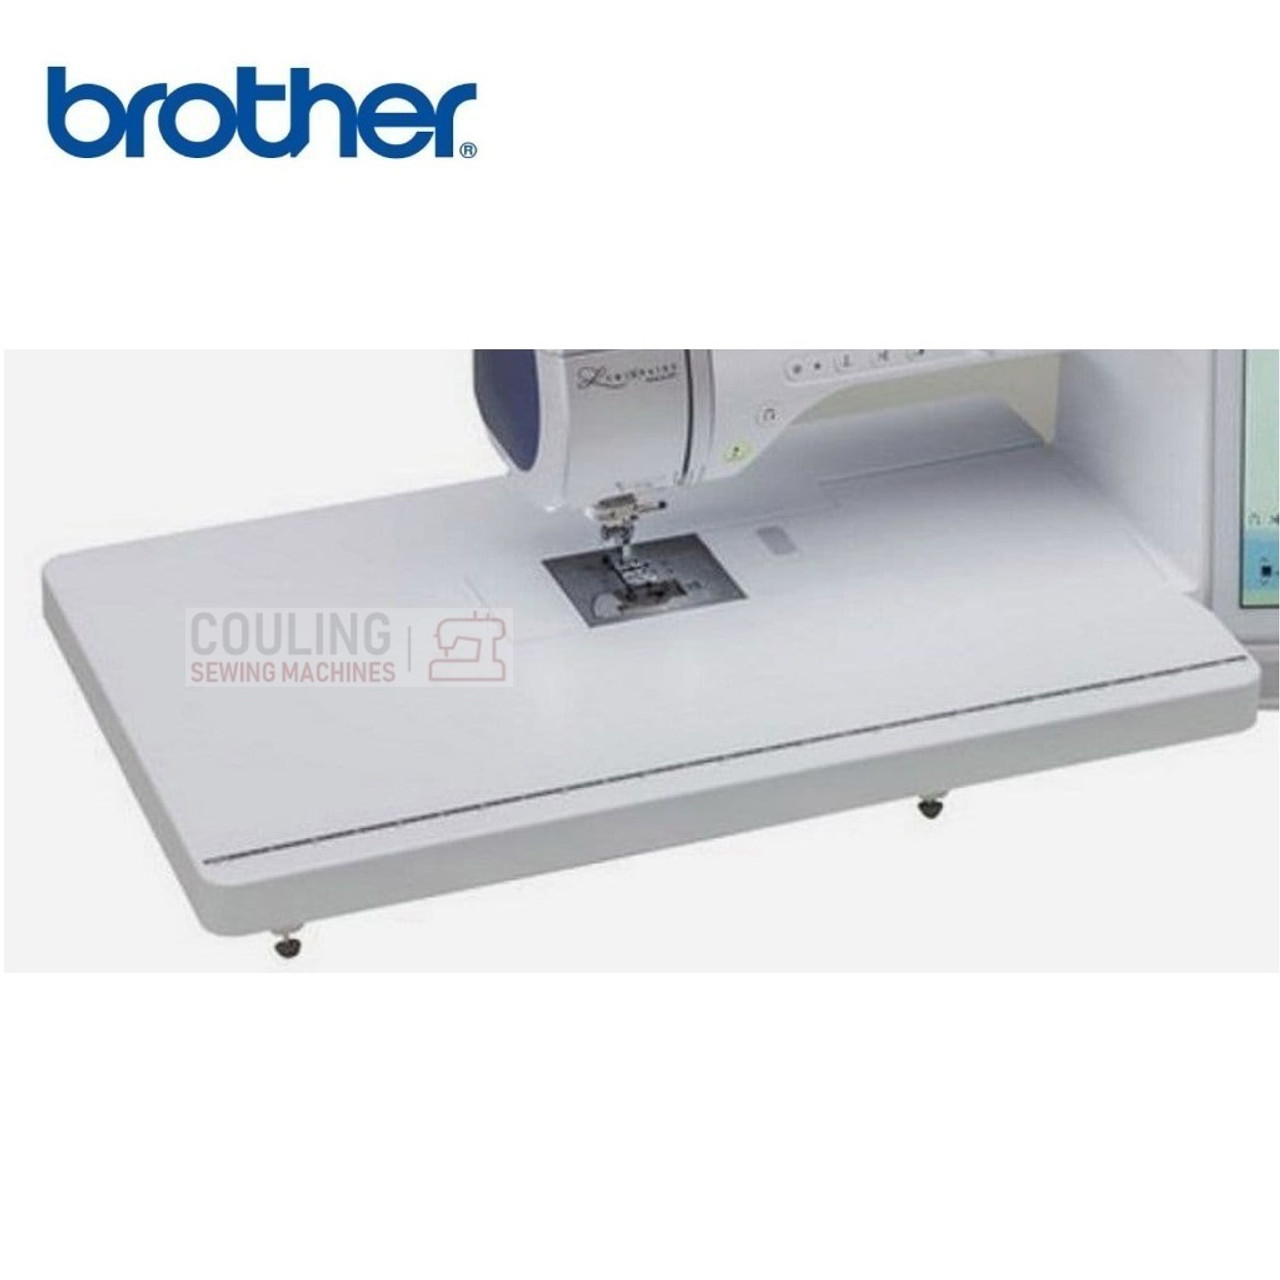 Spares & Accessories - BROTHER - Embroidery Hoops and Frames - Page 1 -  Couling Sewing Machines